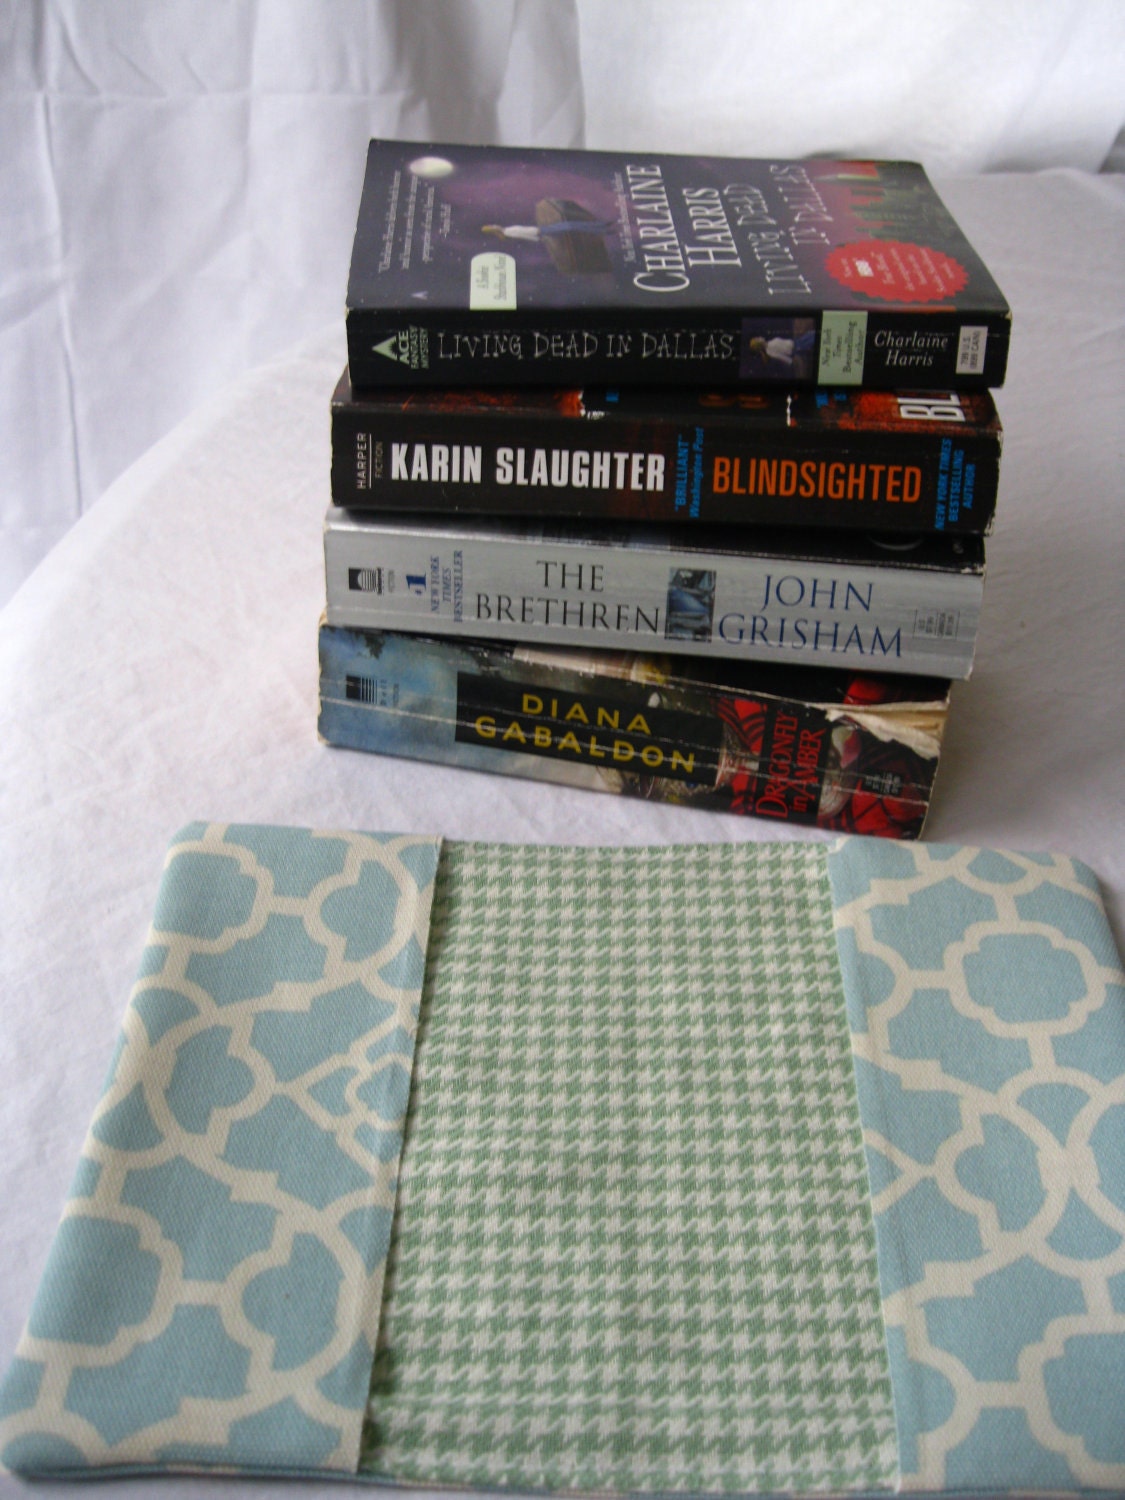 Upcycled Book Cover-- Trade Paperback  Aqua Blue Grapics on Cream Canvas with Green Houndstooth Lining